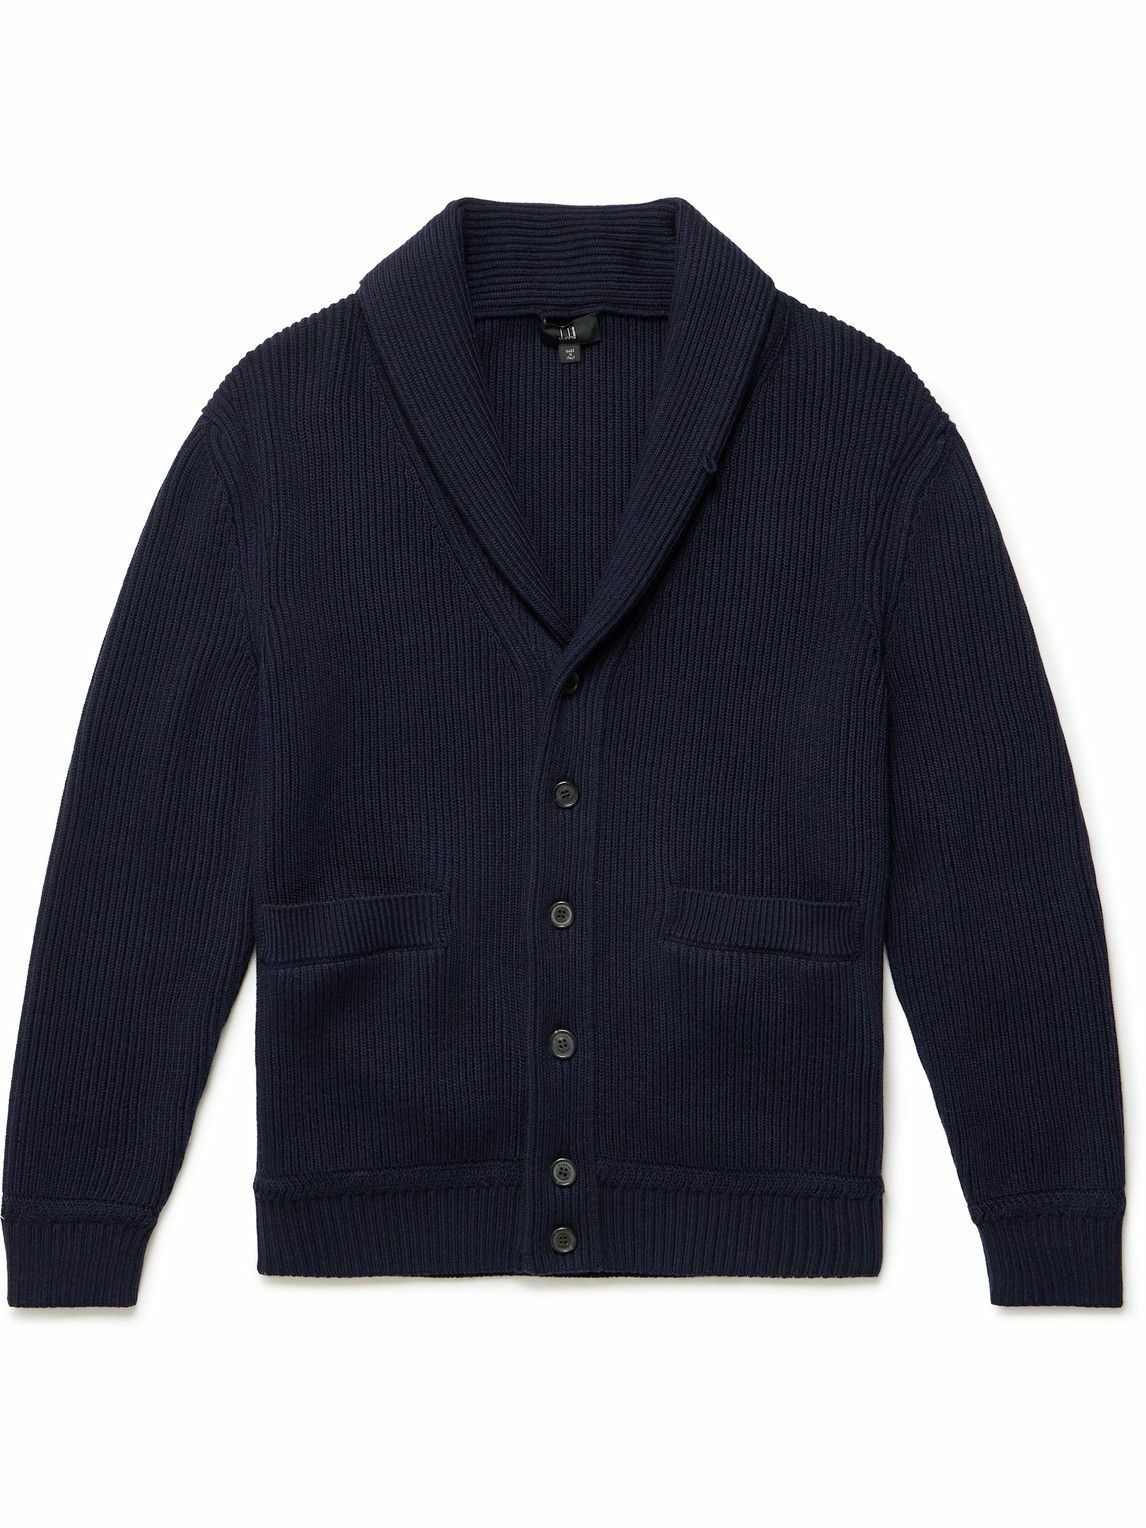 Photo: Dunhill - Shawl-Collar Suede-Trimmed Ribbed Merino Wool Cardigan - Blue